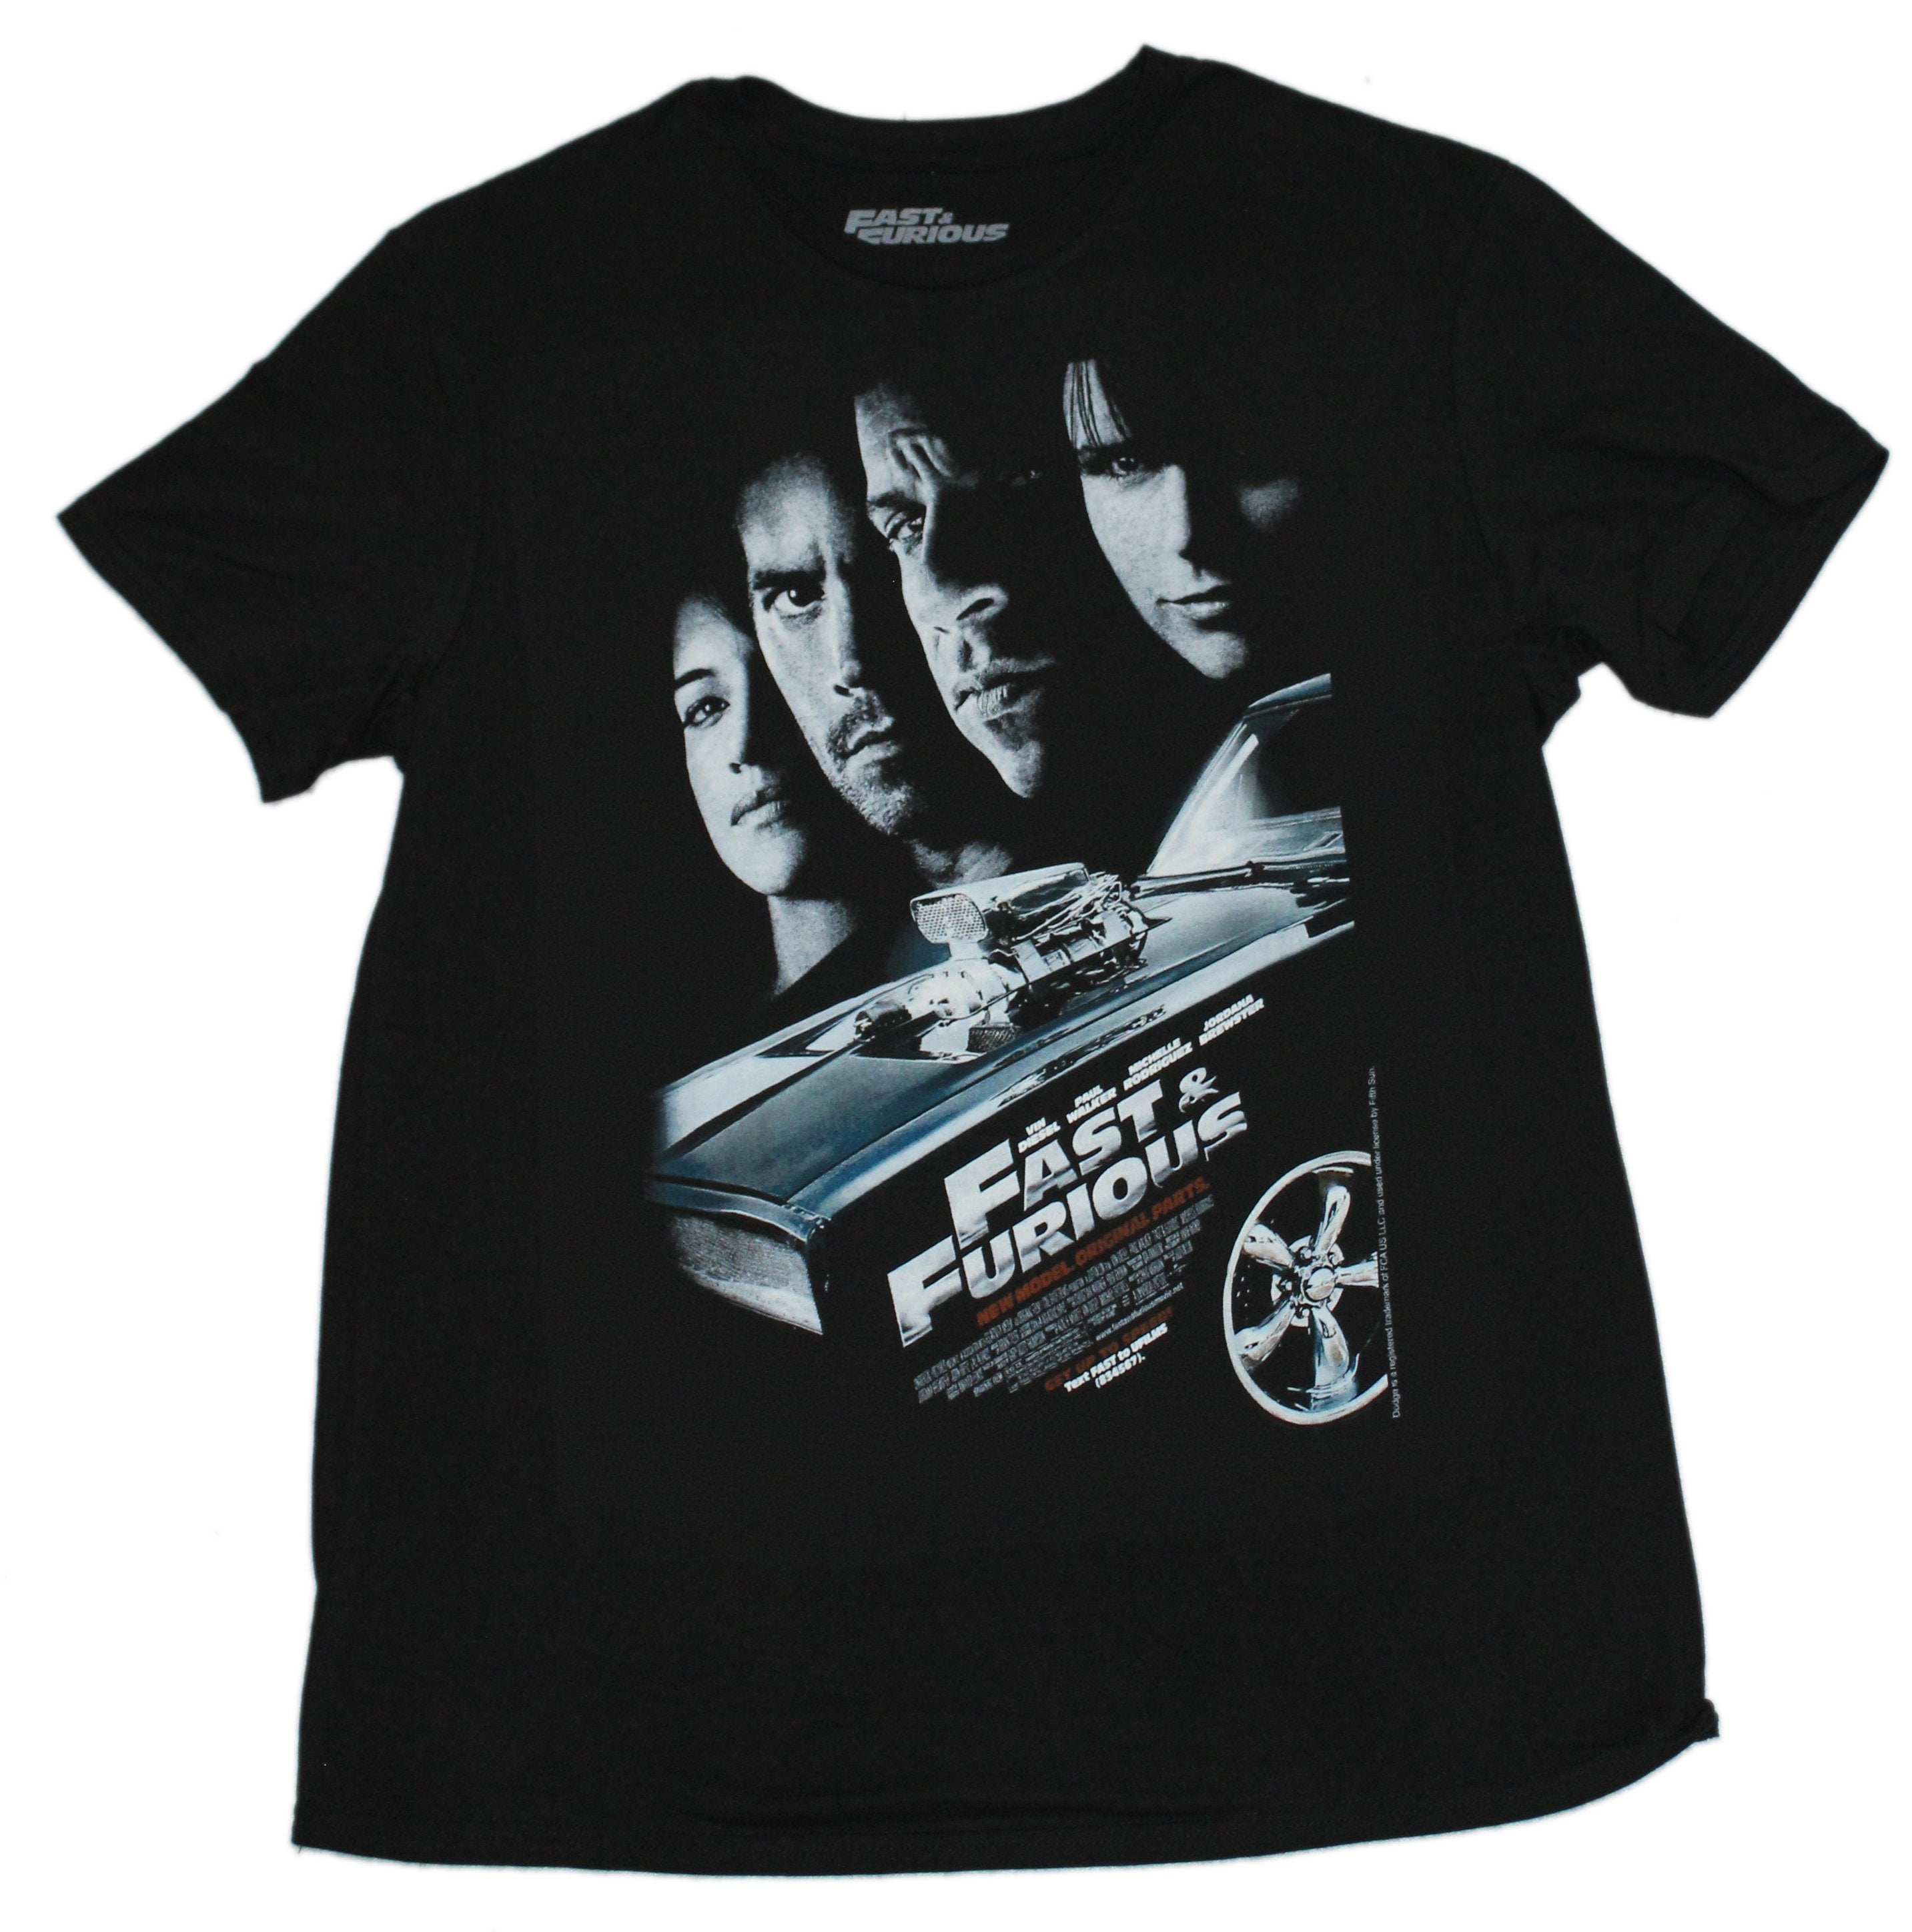 Fast and Furious Mens T-Shirt - Shadowed Trio Movie Poster Image